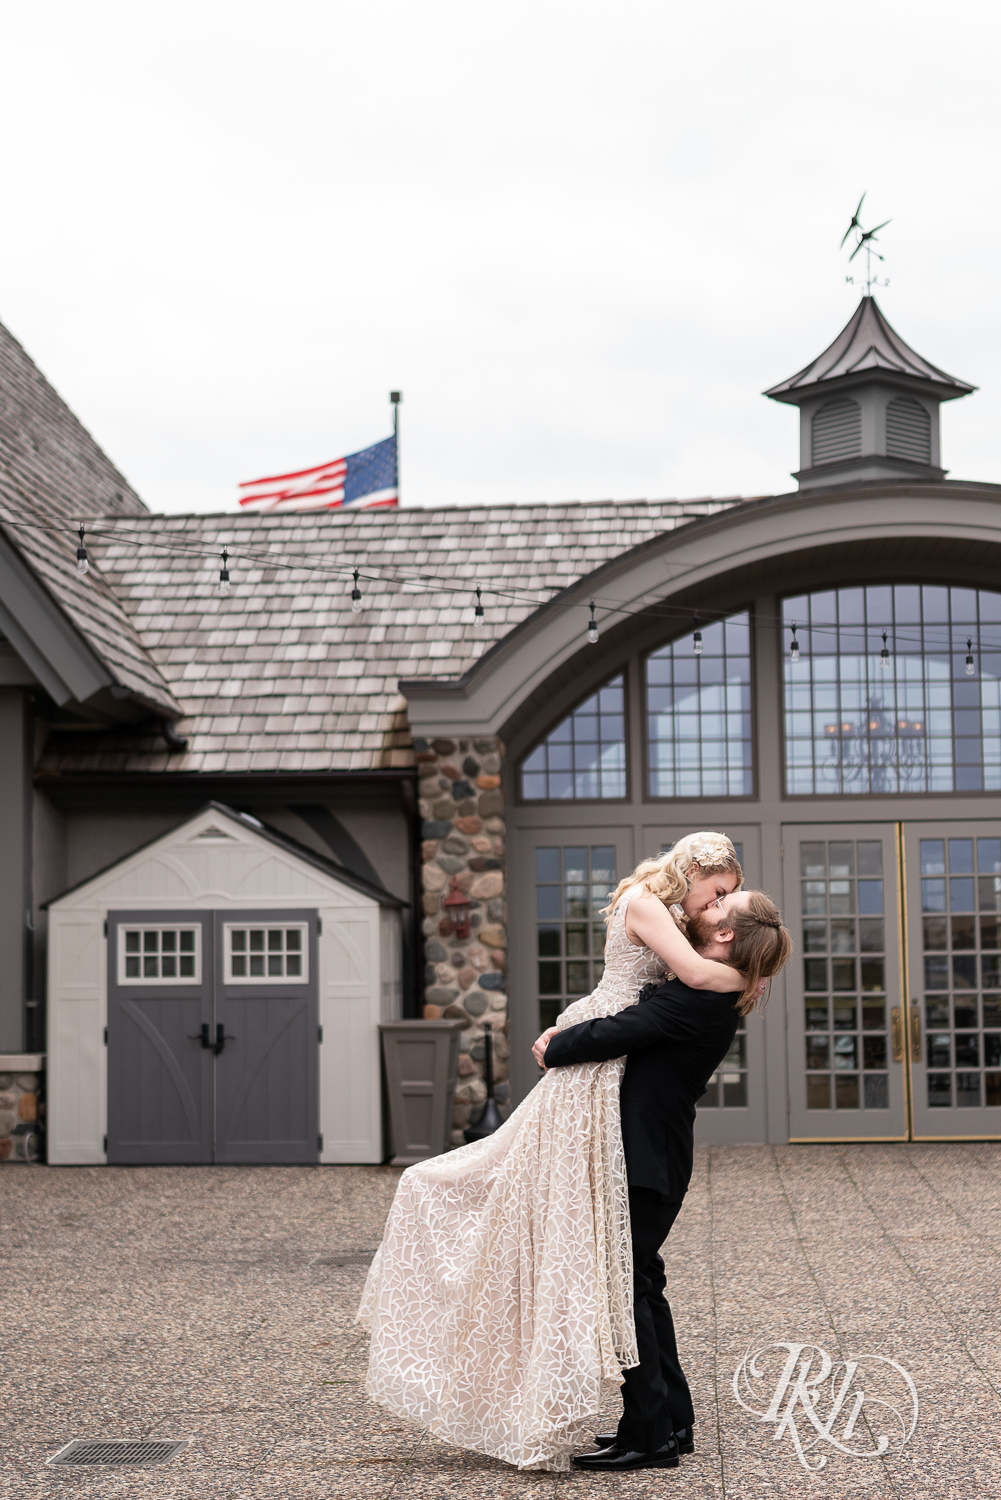 Groom lifts and kisses bride outside at Rush Creek Golf Club in Maple Grove, Minnesota.